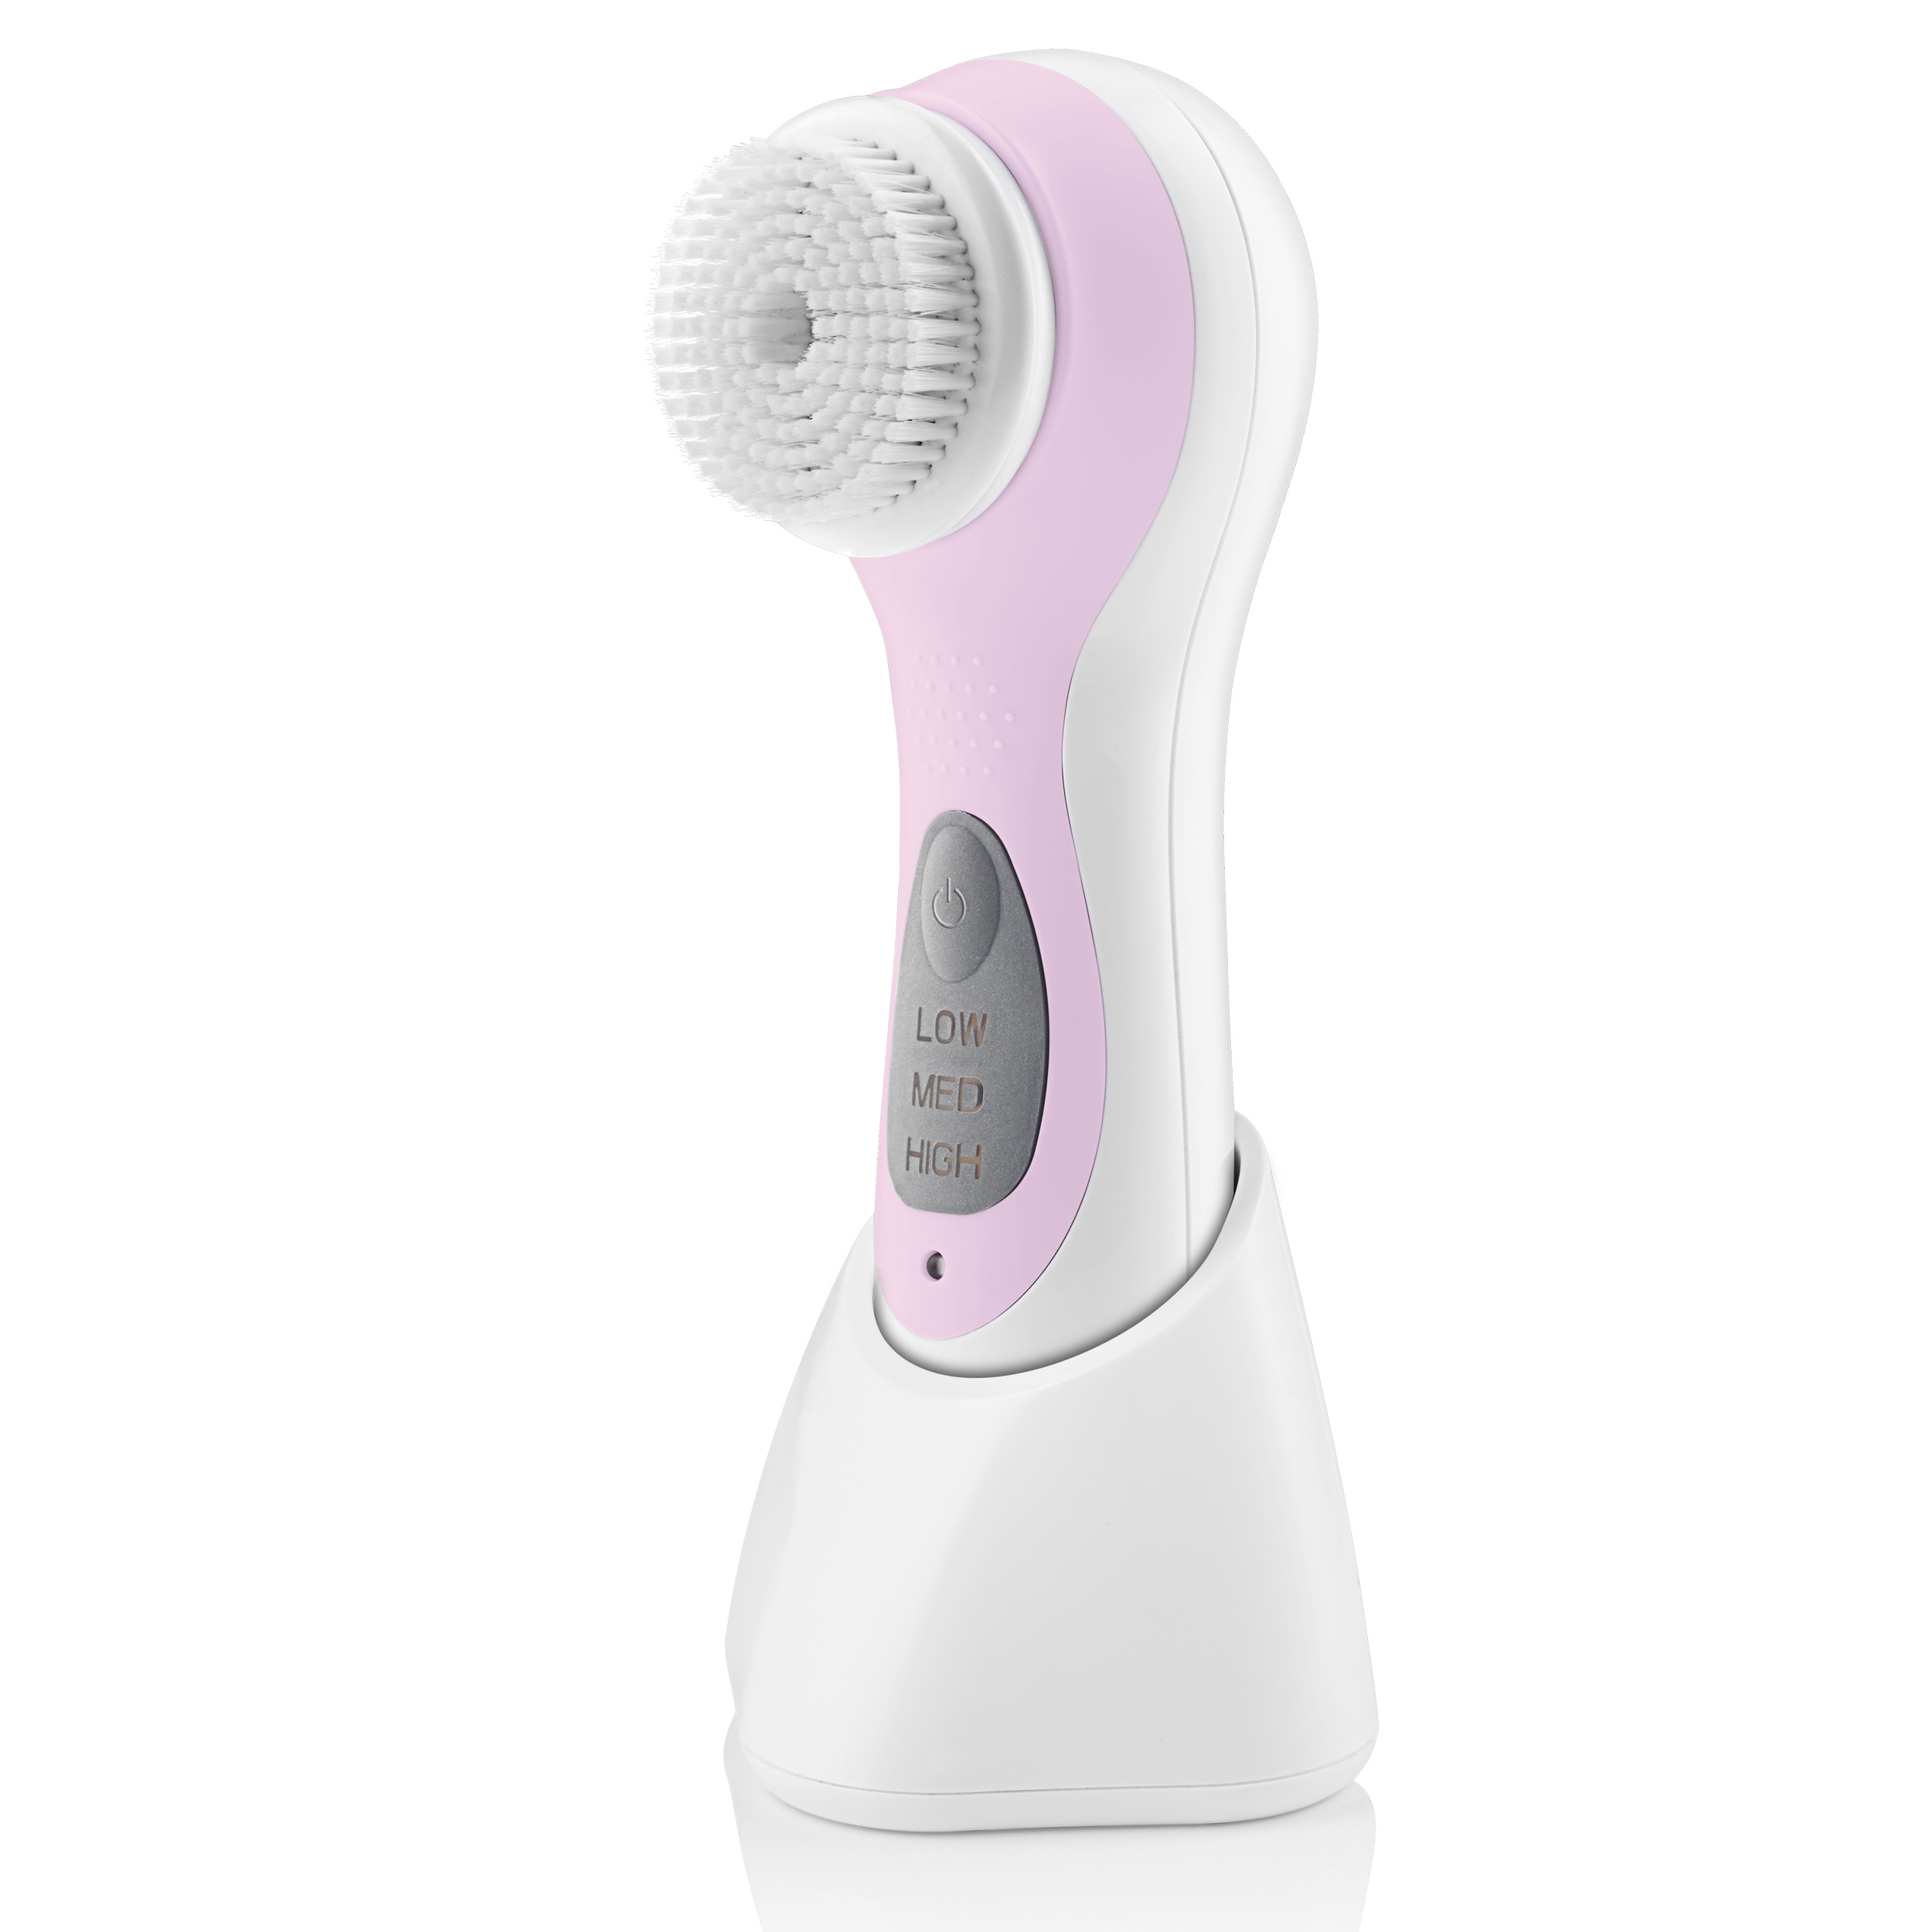 True Glow™ by Conair sonic skincare cleansing brush